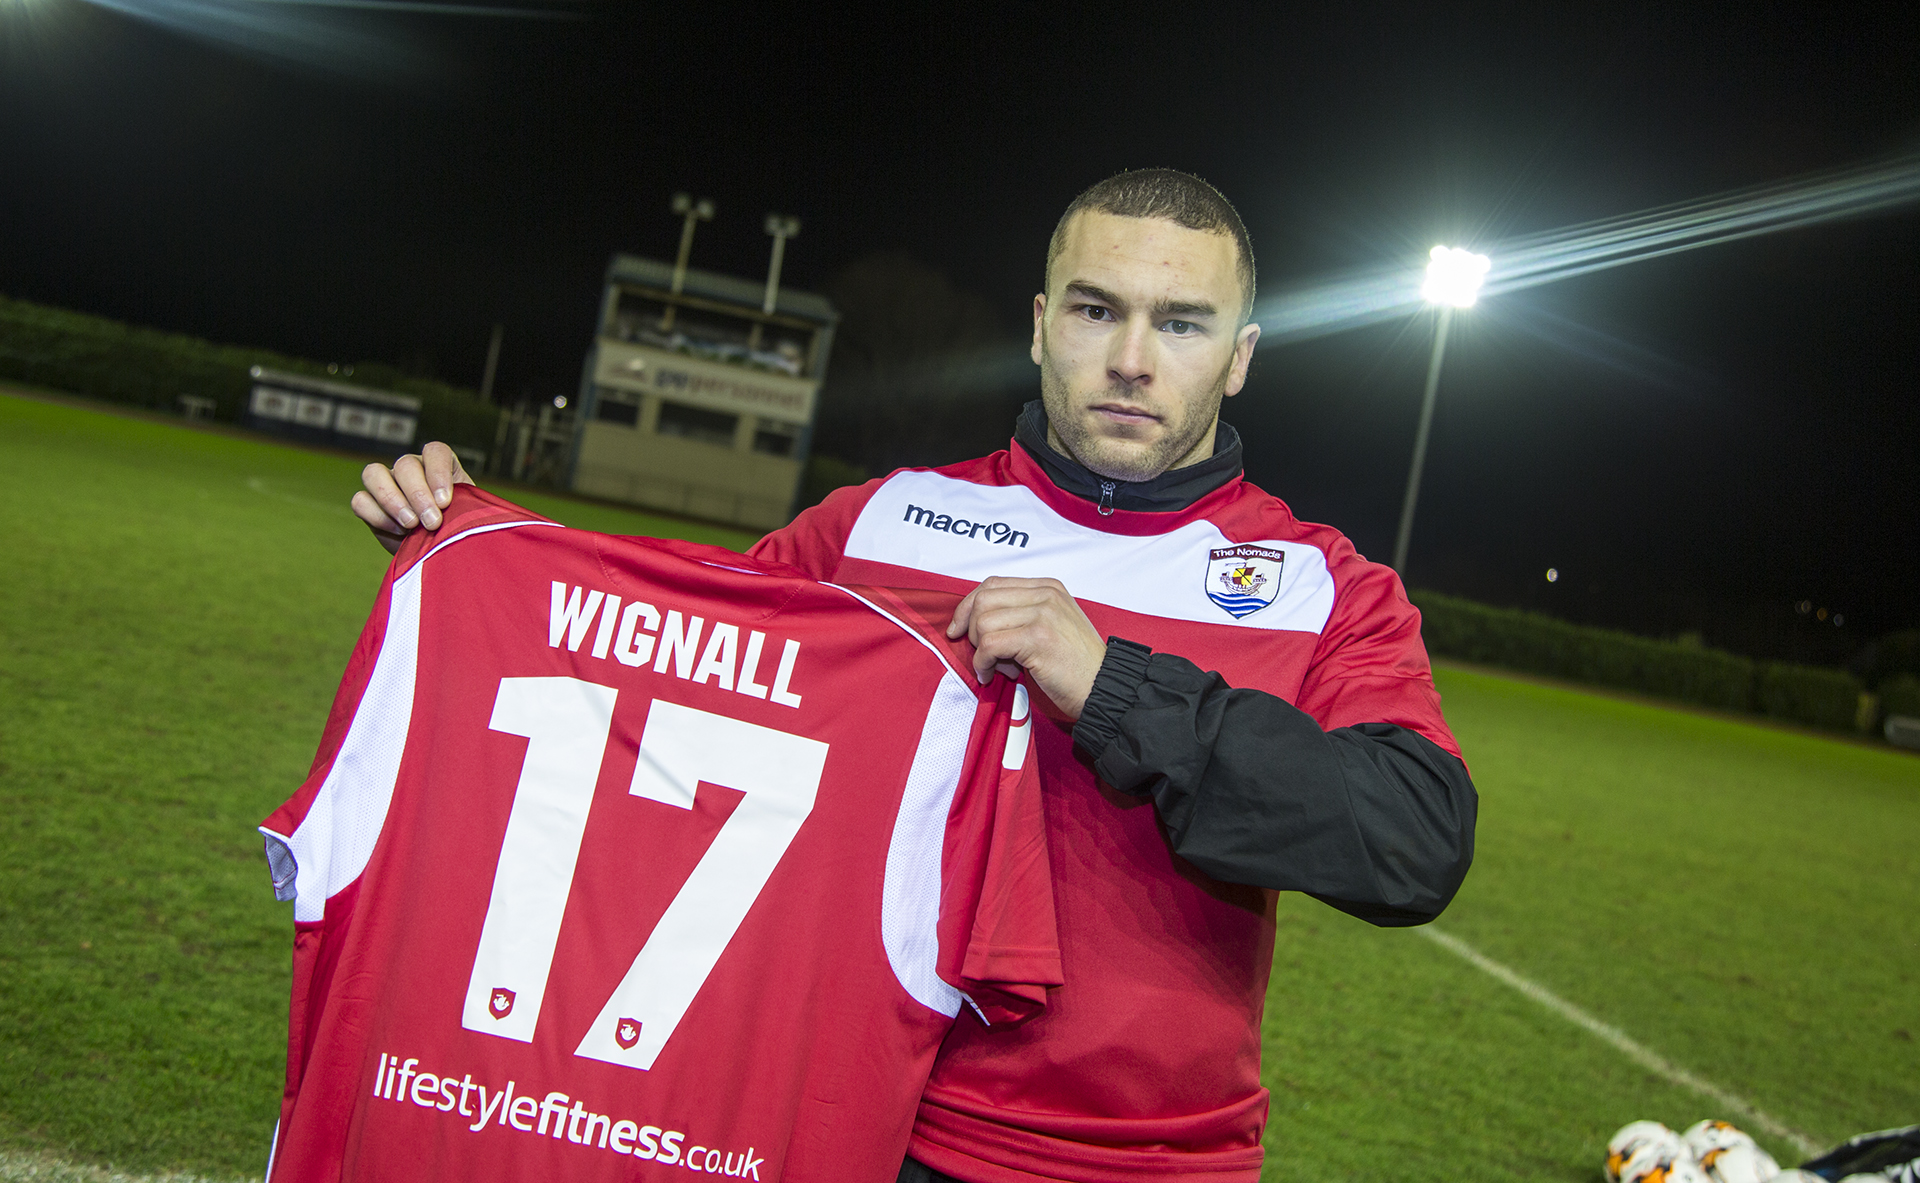 Ryan Wignall with his new number 17 shirt